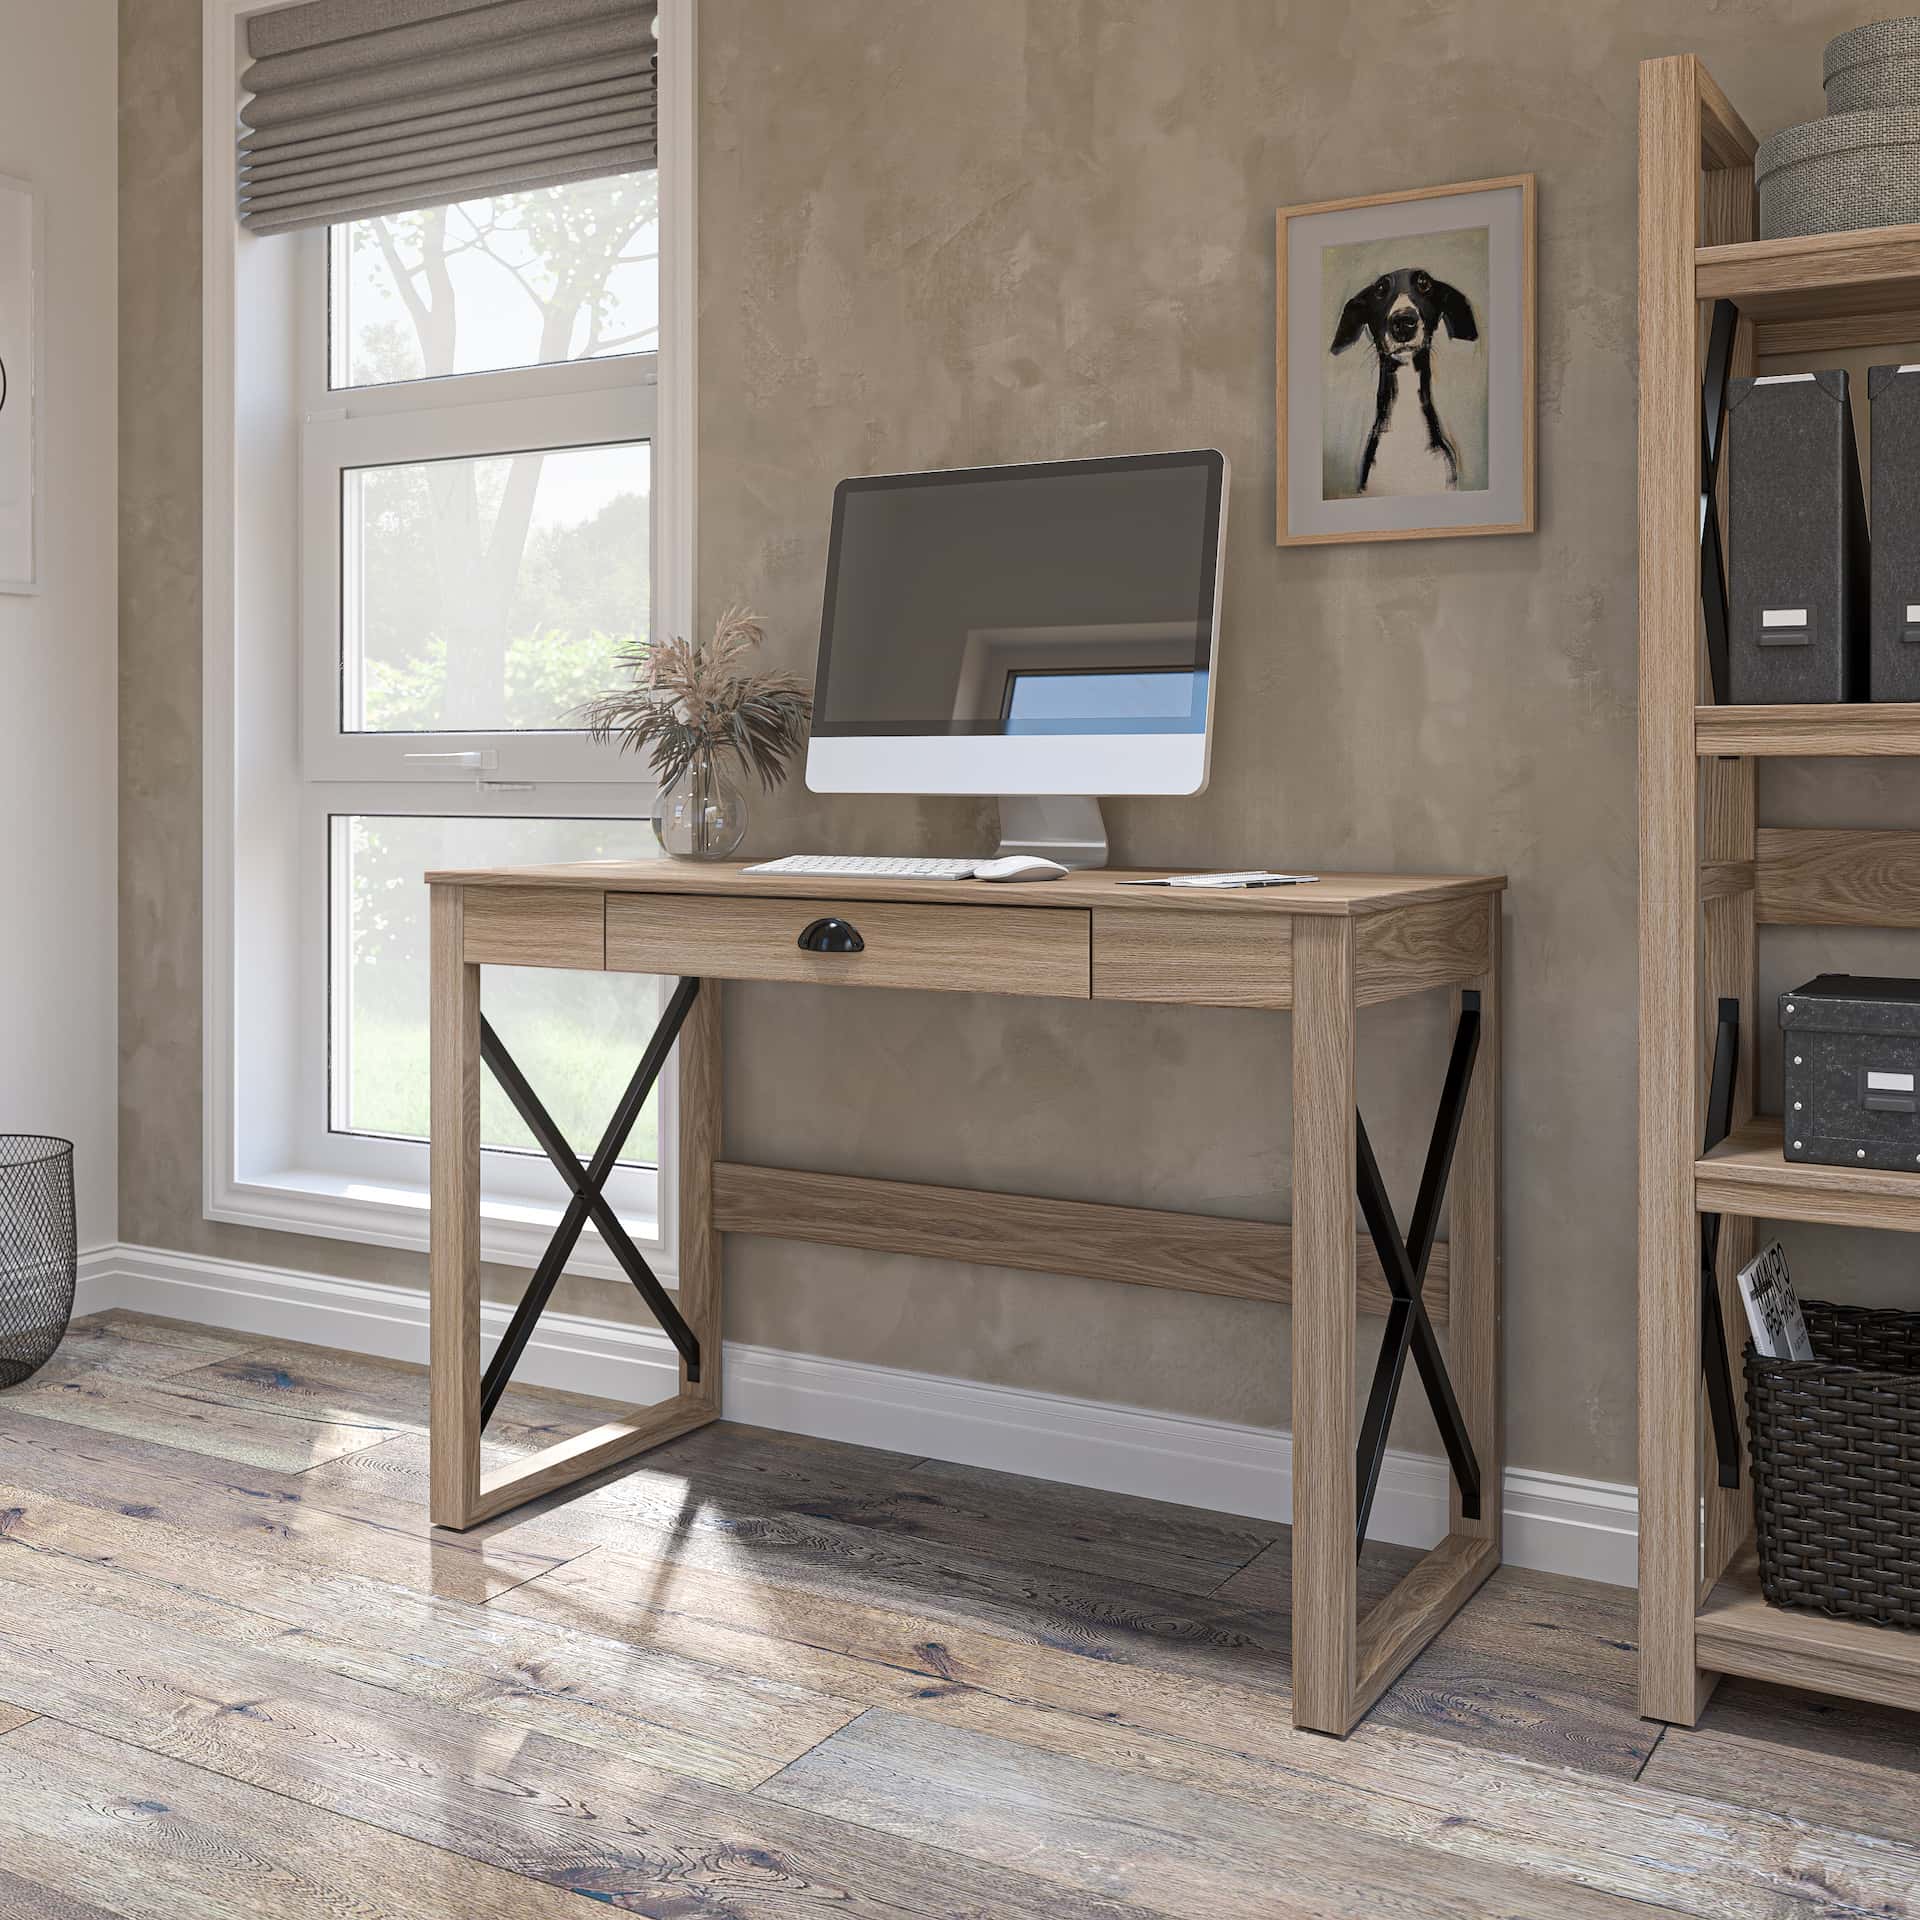 Small home office furniture in a relaxing environment